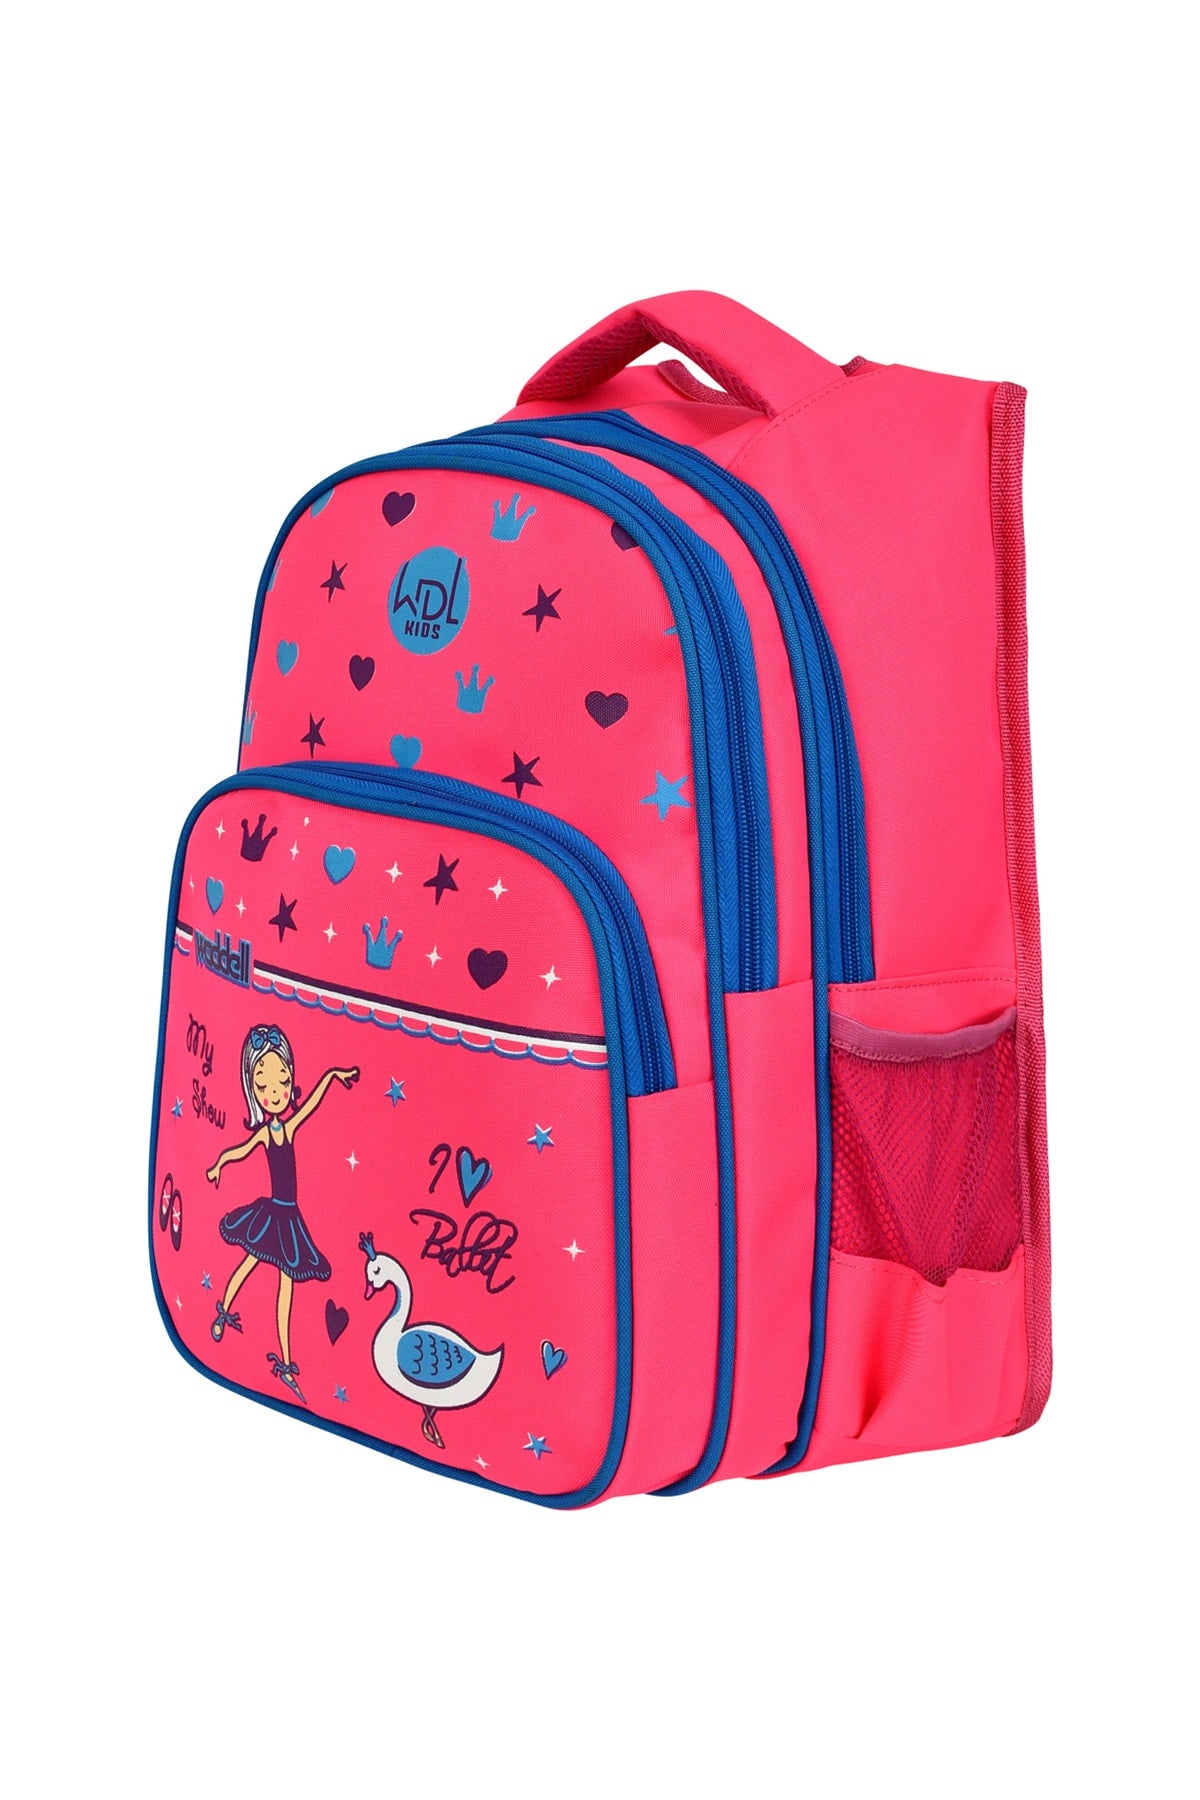 Licensed Pink Princess Pattern Primary School Backpack And Lunch Box